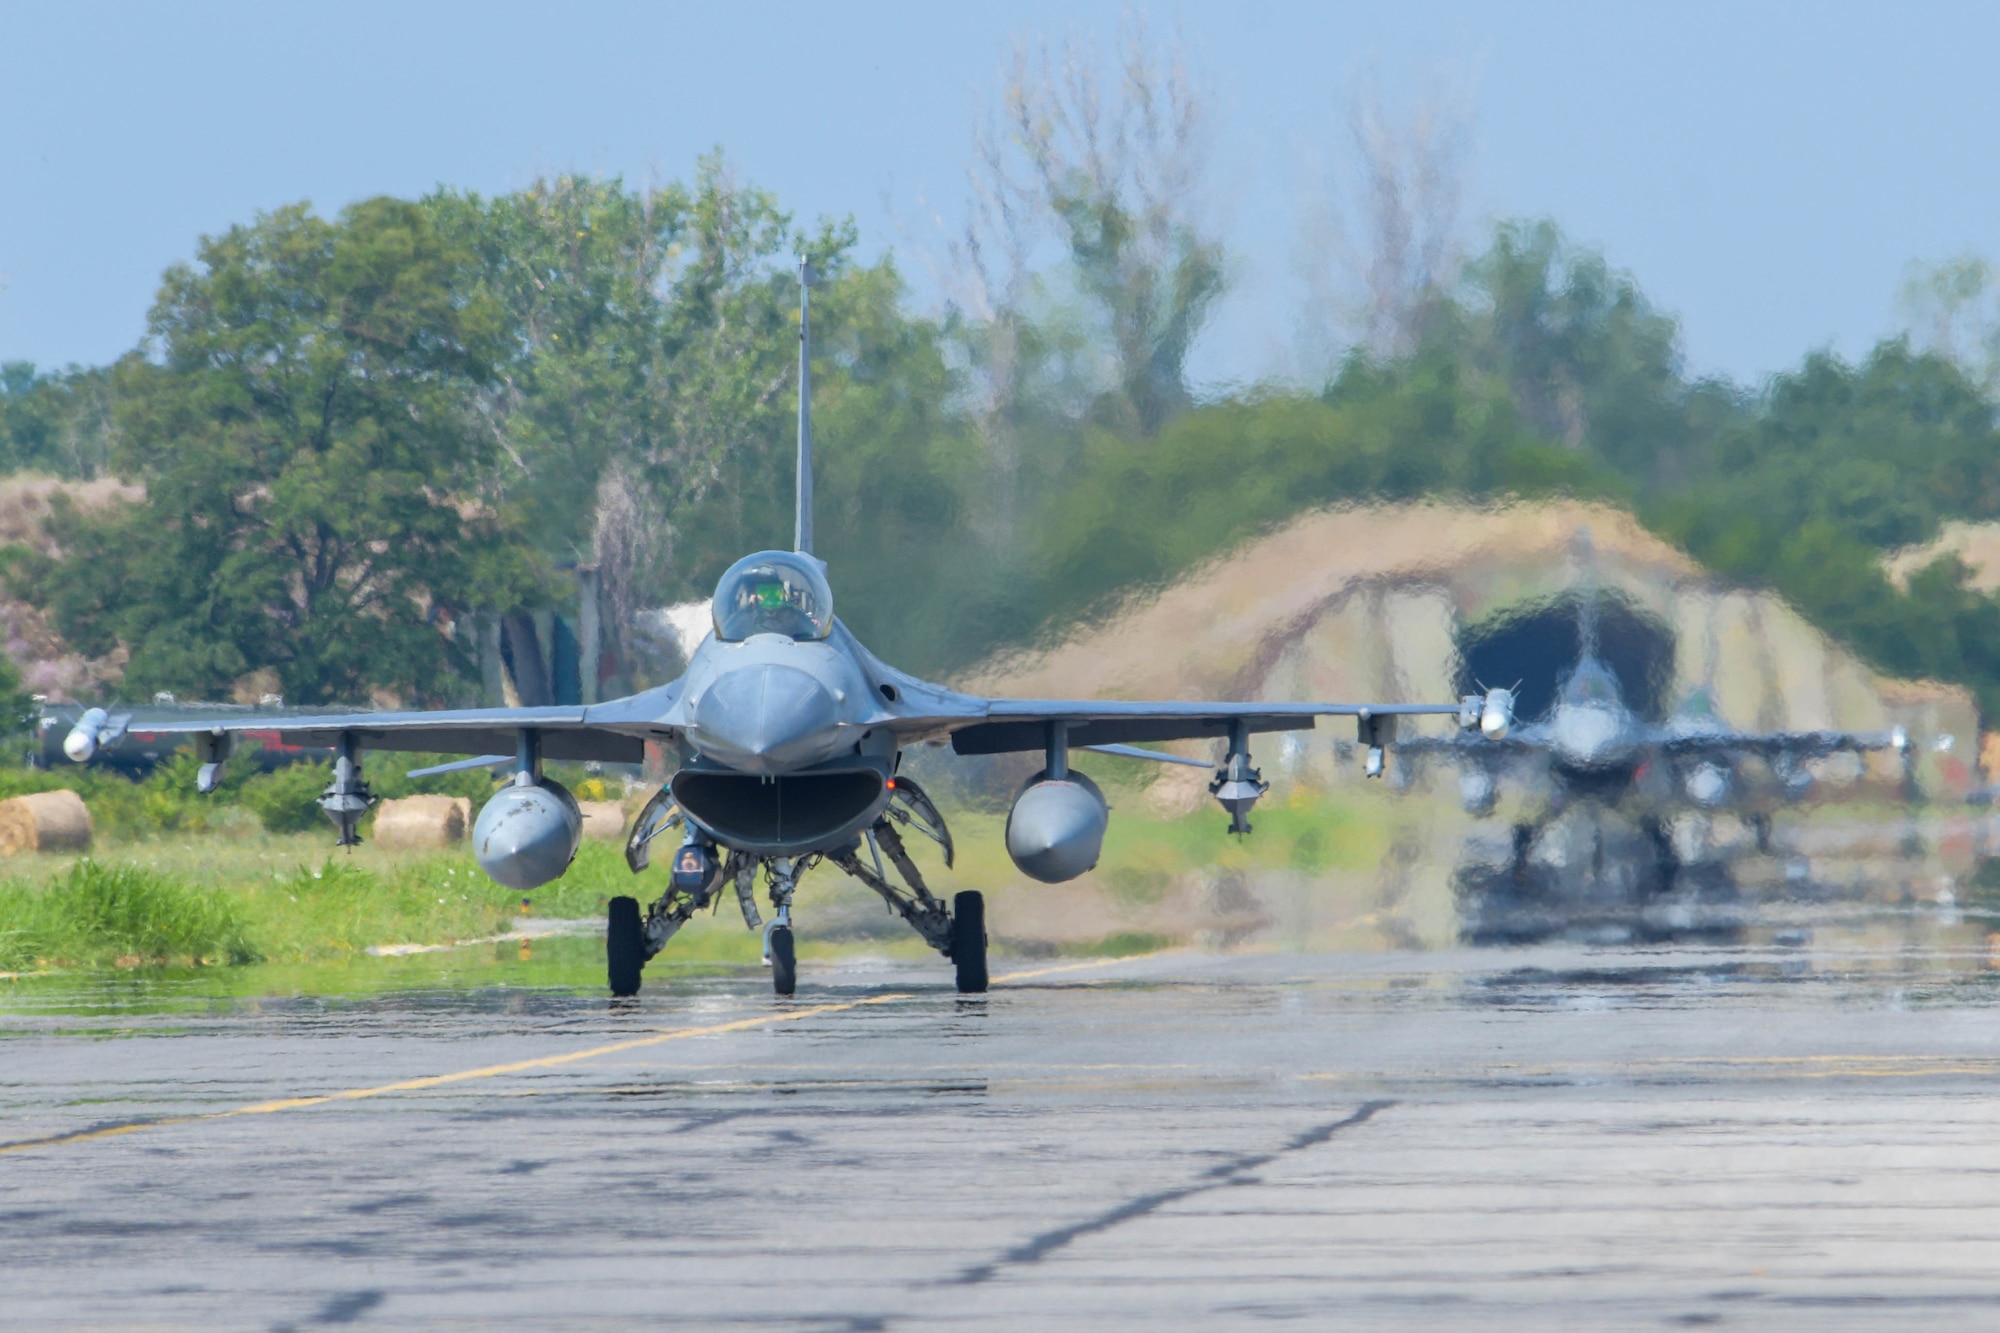 Two U.S. Air Force F-16 Fighting Falcons assigned to the 555th Fighter Squadron taxis on the flightline during Thracian Star 21 at Graf Ignatievo Air Base, Bulgaria, July 20, 2021. Eight F-16s assigned to the 555th FS participated in Thracian Star 21, a Bulgarian air force-led exercise aiming to enhance interoperability and the ability to rapidly deploy to remote locations. (U.S. Air Force photo by Airman 1st Class Brooke Moeder)